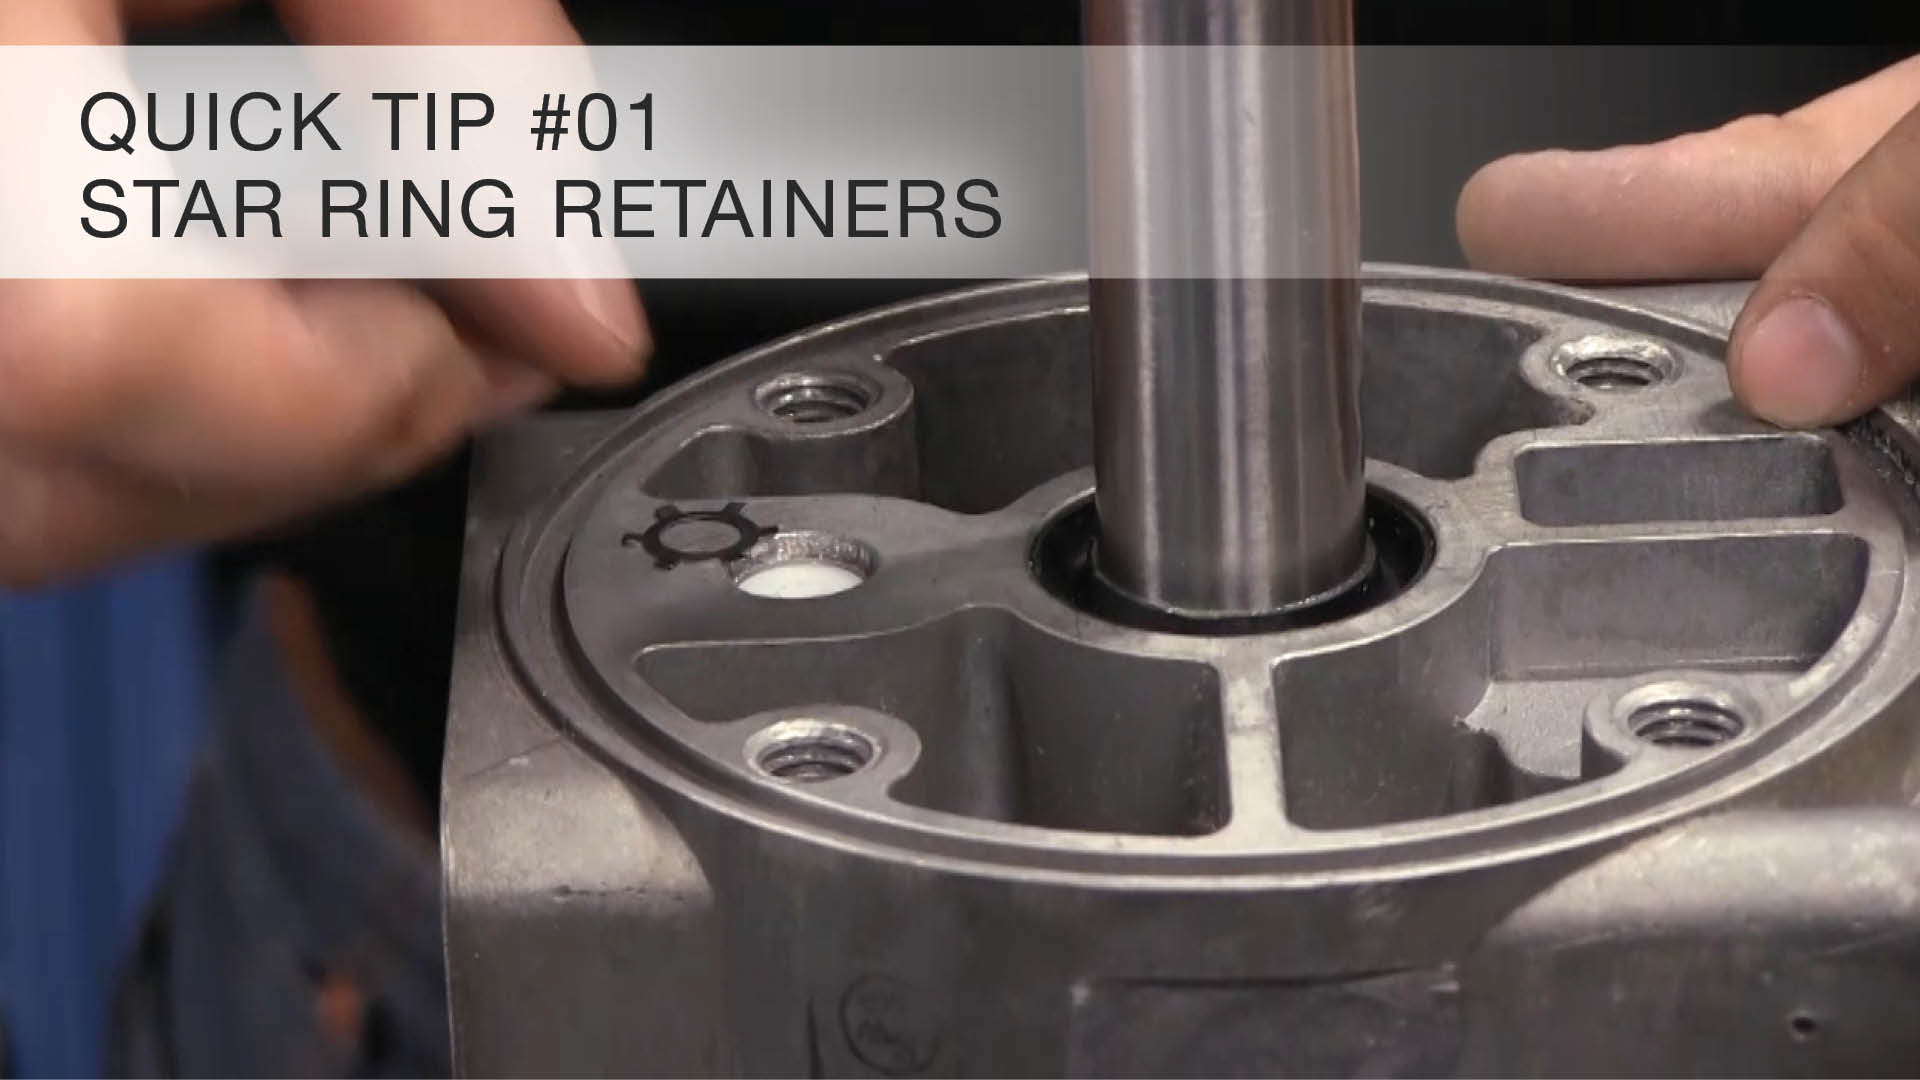 Quick Tip #01 - Star Ring Retainers